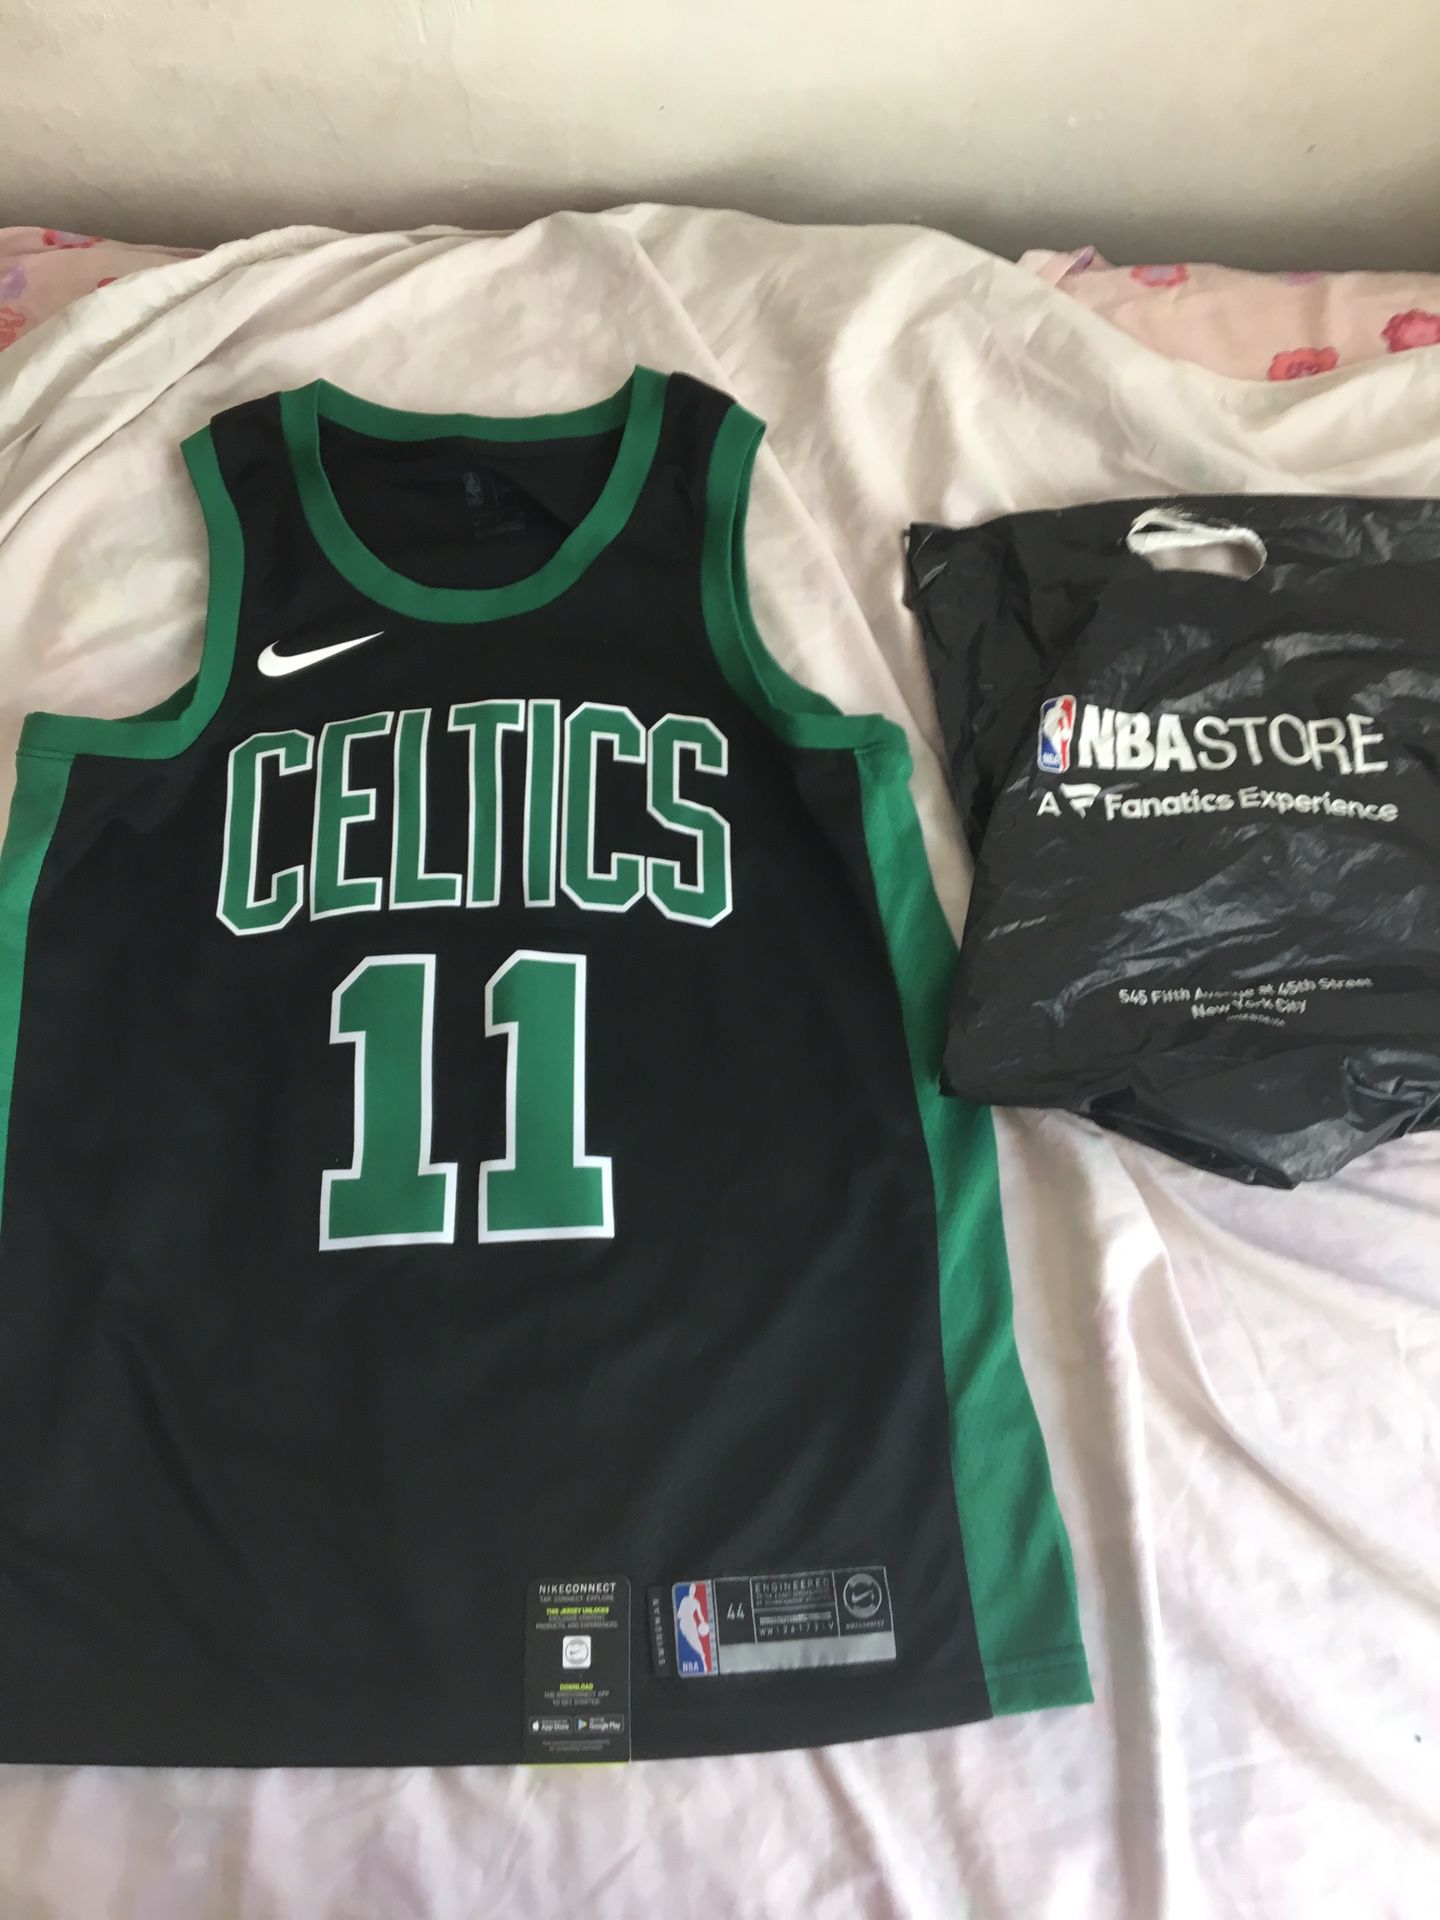 Brand new Celtics Kyrie Jersey,who want to trade . I’m looking for a bape shirt or Vlone shirt or any hoodie